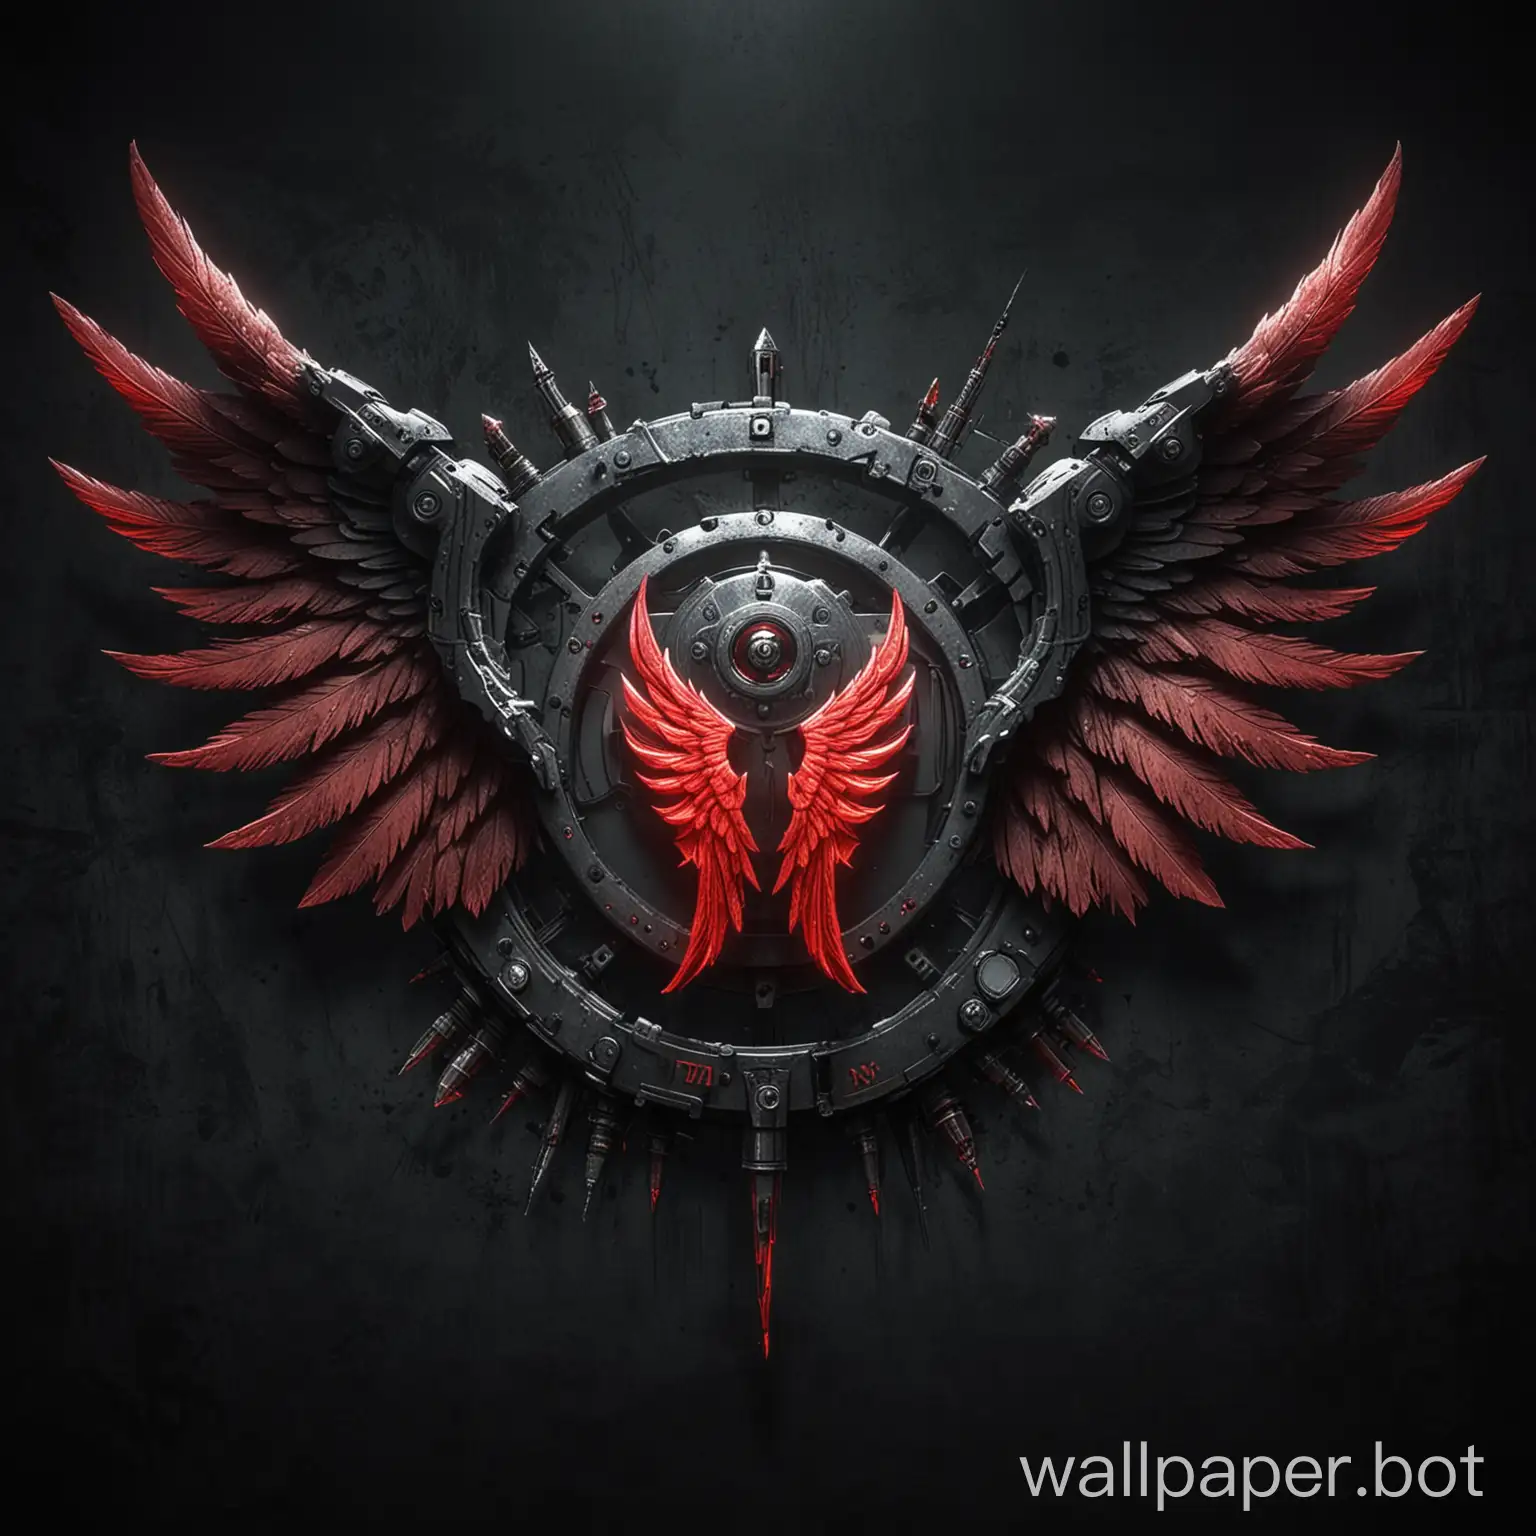 dangerous looking wallpaper, cyperpunk style, dark background, red angel wing logo in the middle. no text